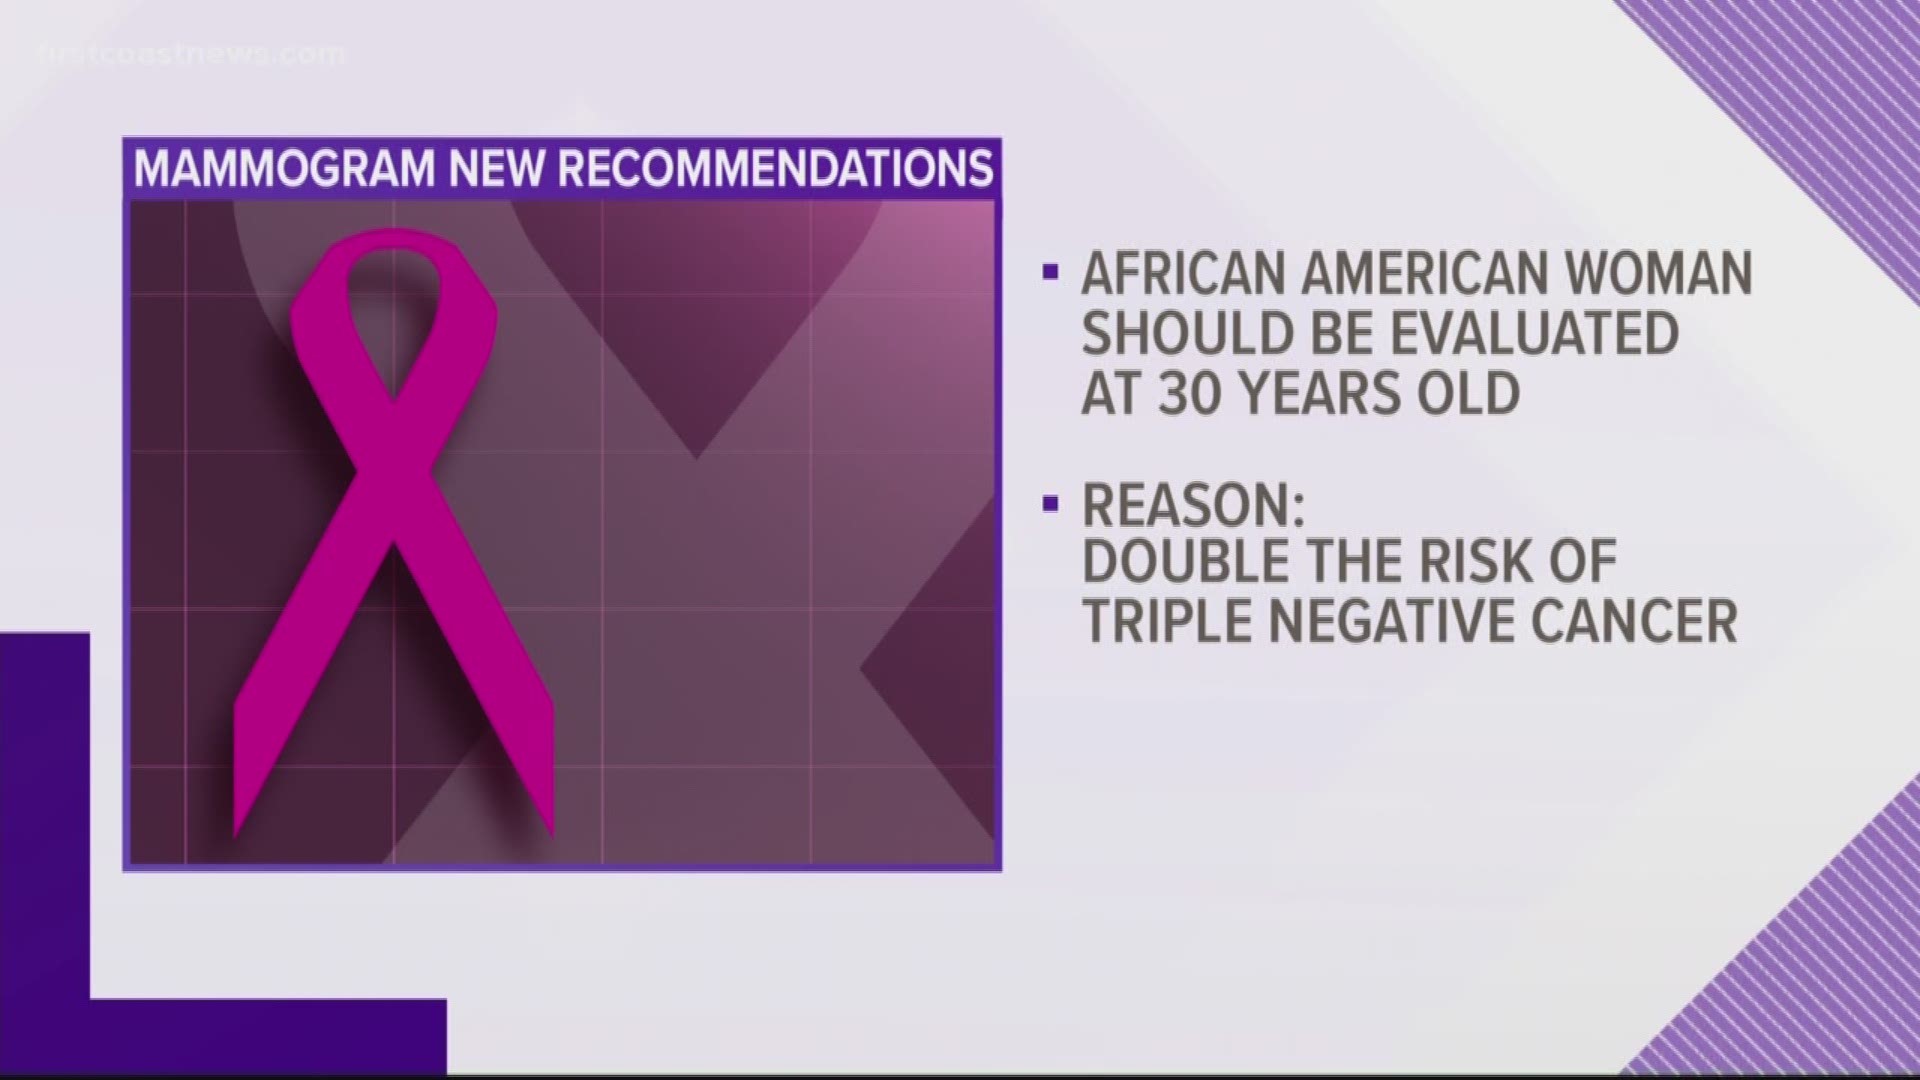 The reason: African-American women have twice the risk of triple-negative cancer.